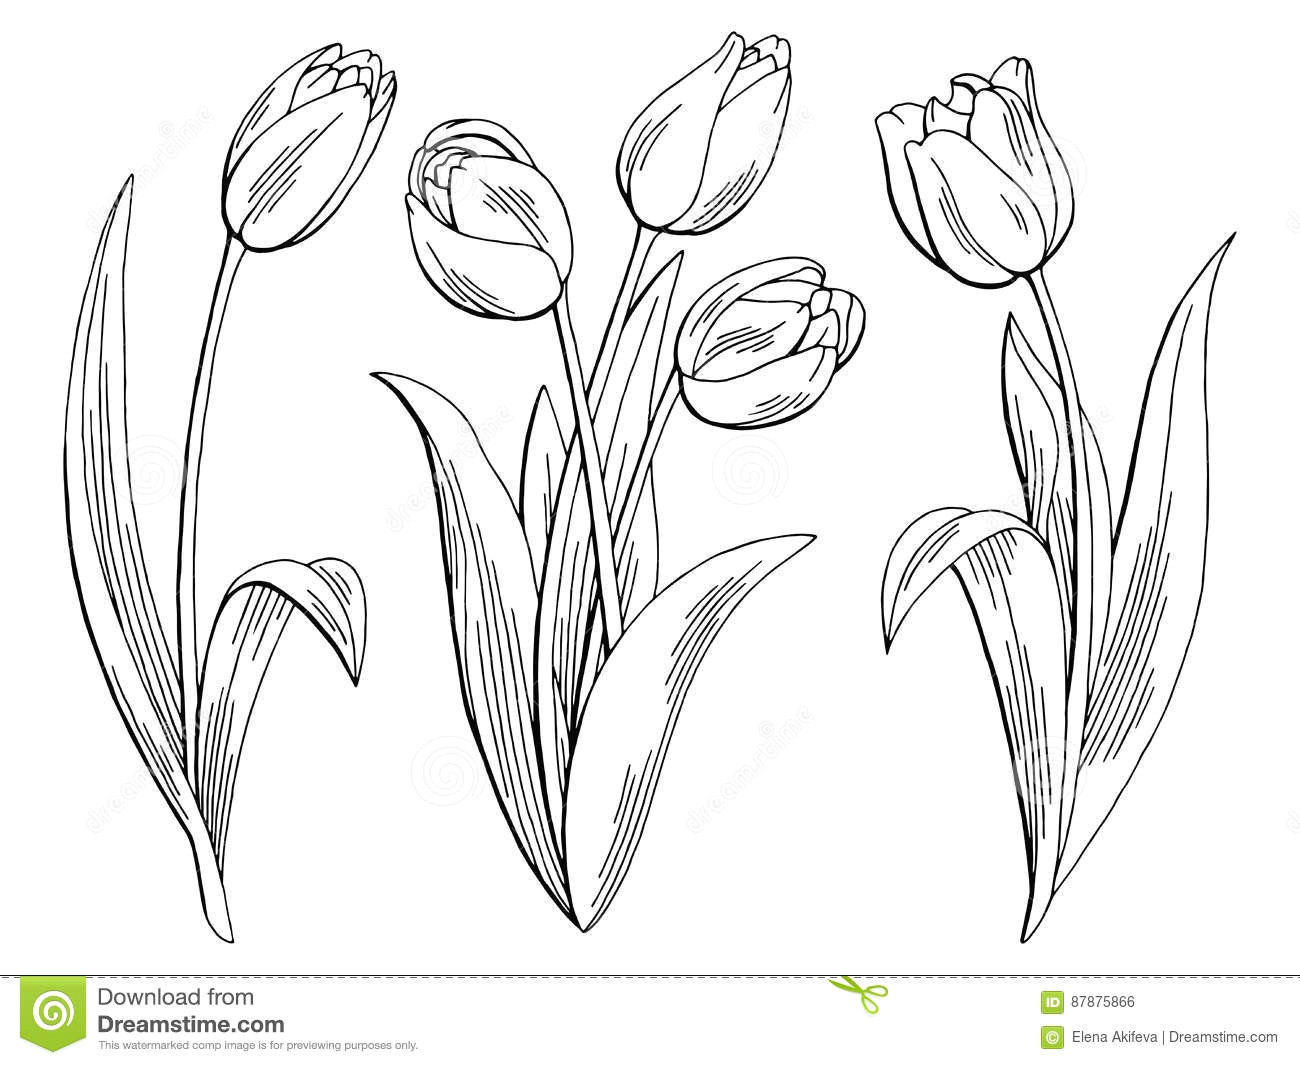 Drawings Of Flowers In Black and White Tulip Flower Graphic Black White isolated Sketch Illustration Stock